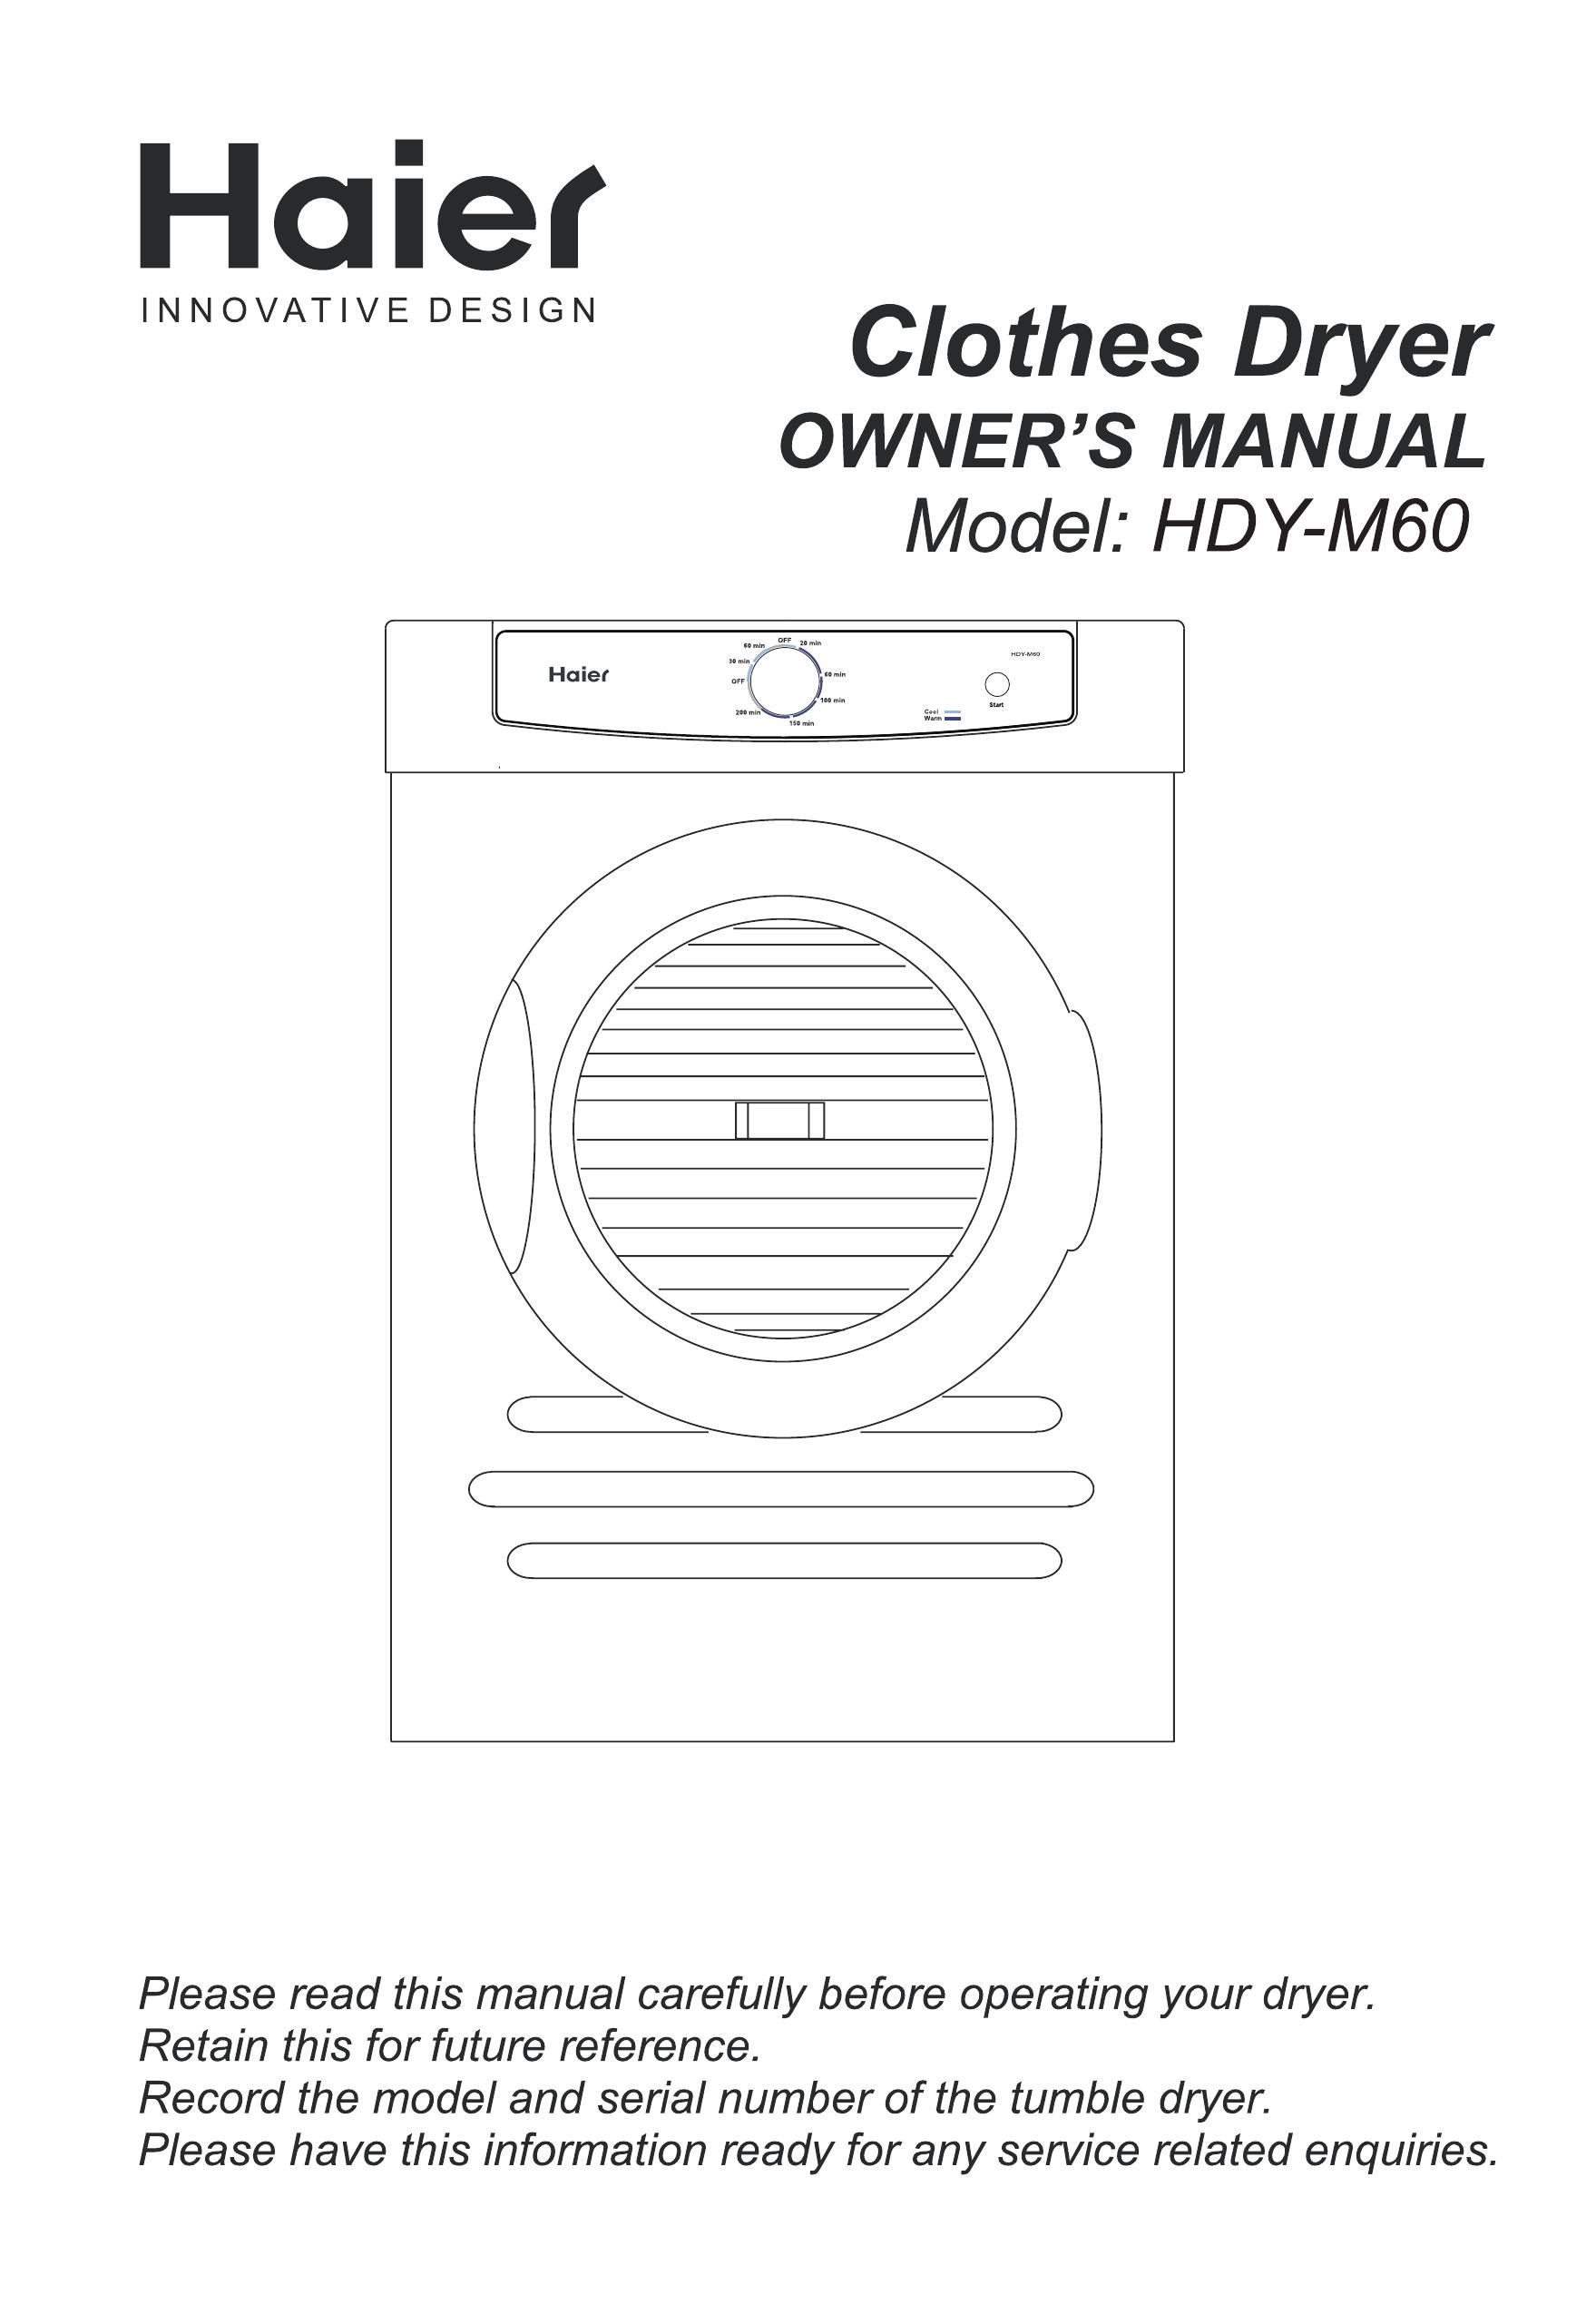 Haier HDY-M60 Clothes Dryer User Manual